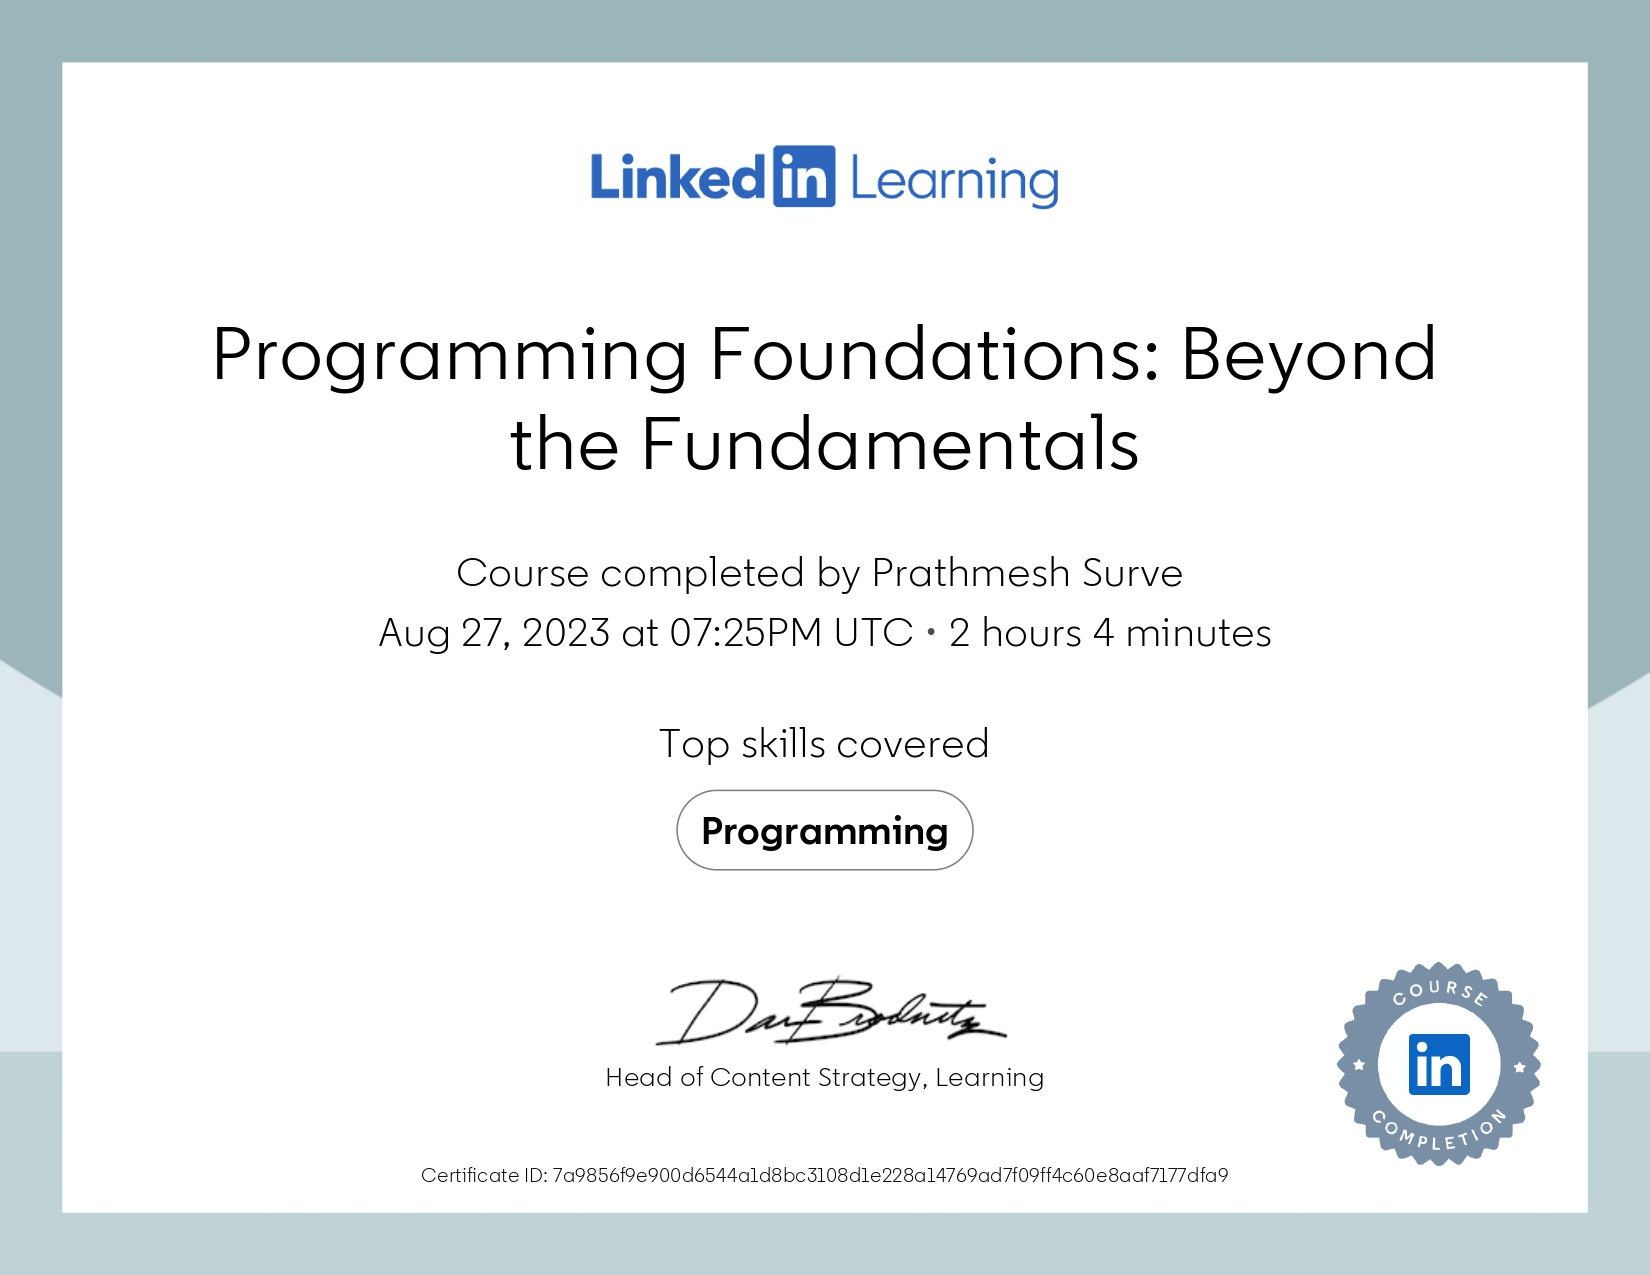 Programming Foundations: Beyond the Fundamentals Certificate by LinkedIn